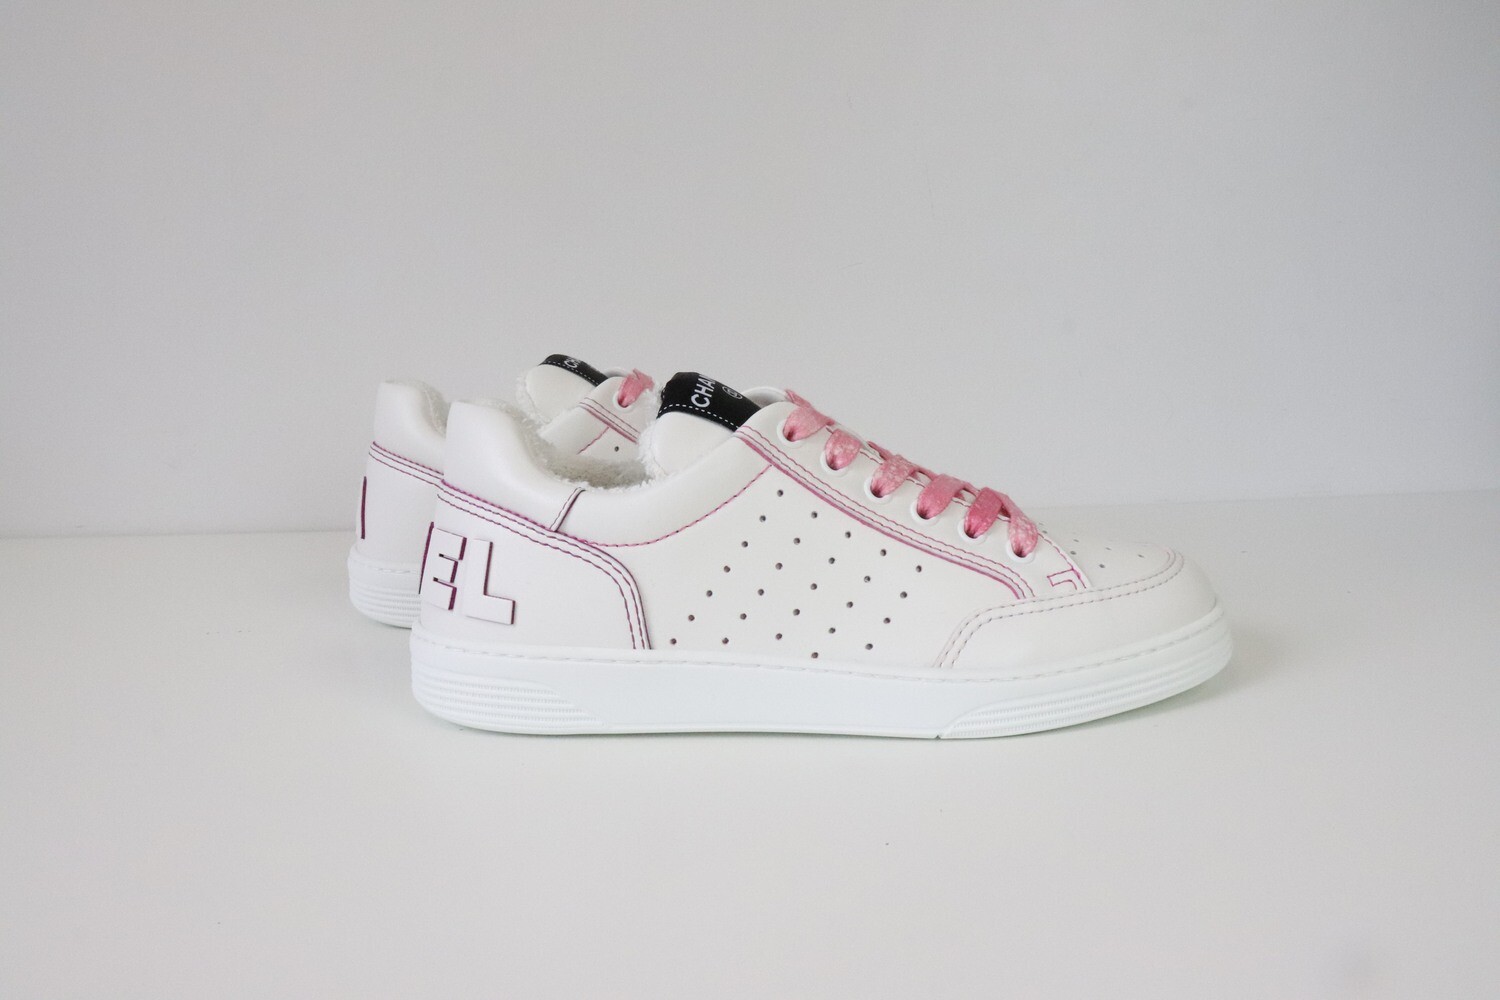 Chanel Sneakers, Pink Suede, New in Box GA001